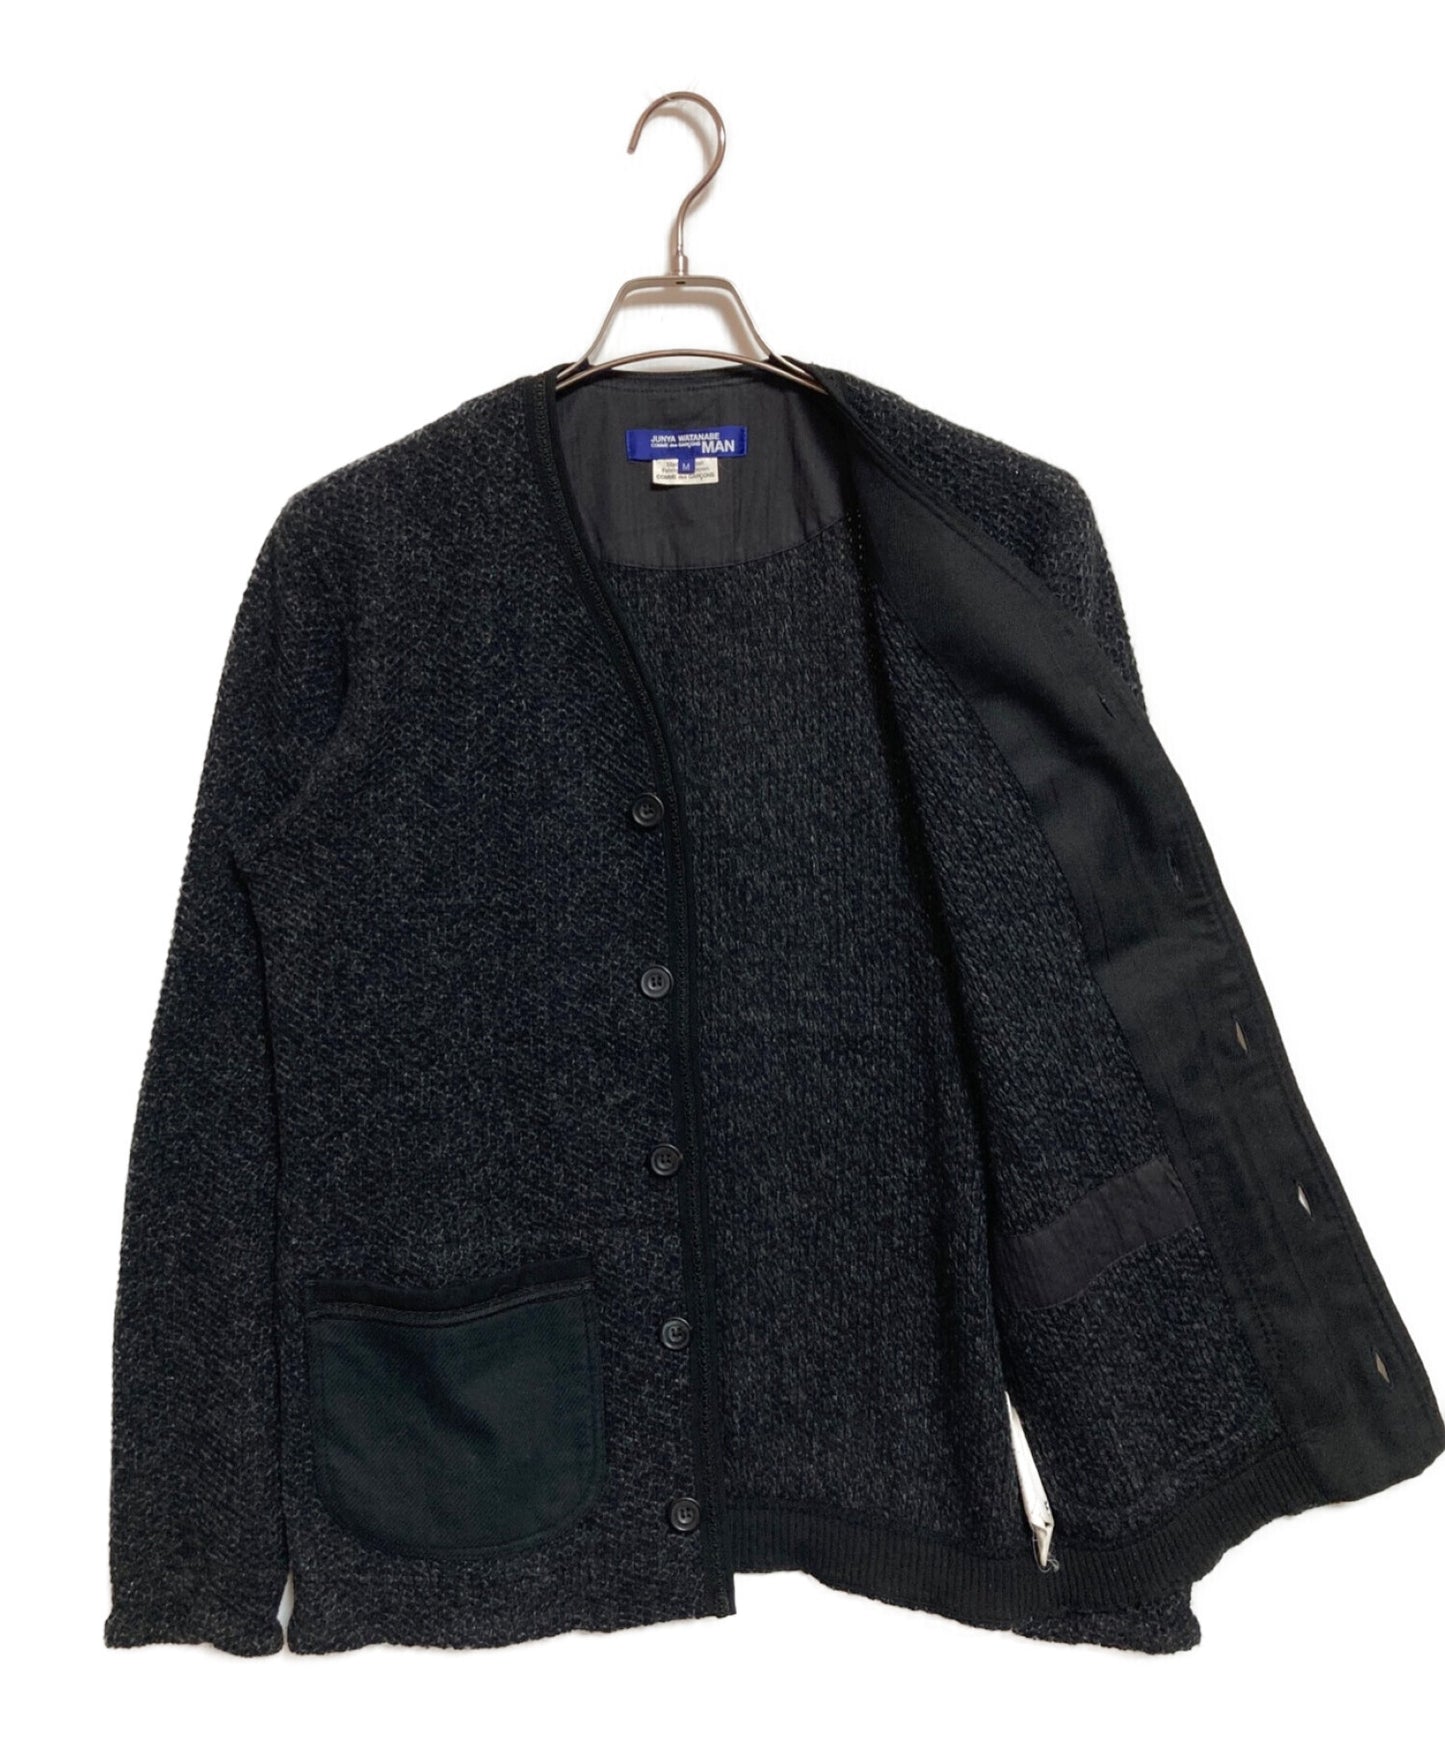 [Pre-owned] COMME des GARCONS JUNYA WATANABE MAN Elbow Patch Knit Cardigan WP-T018